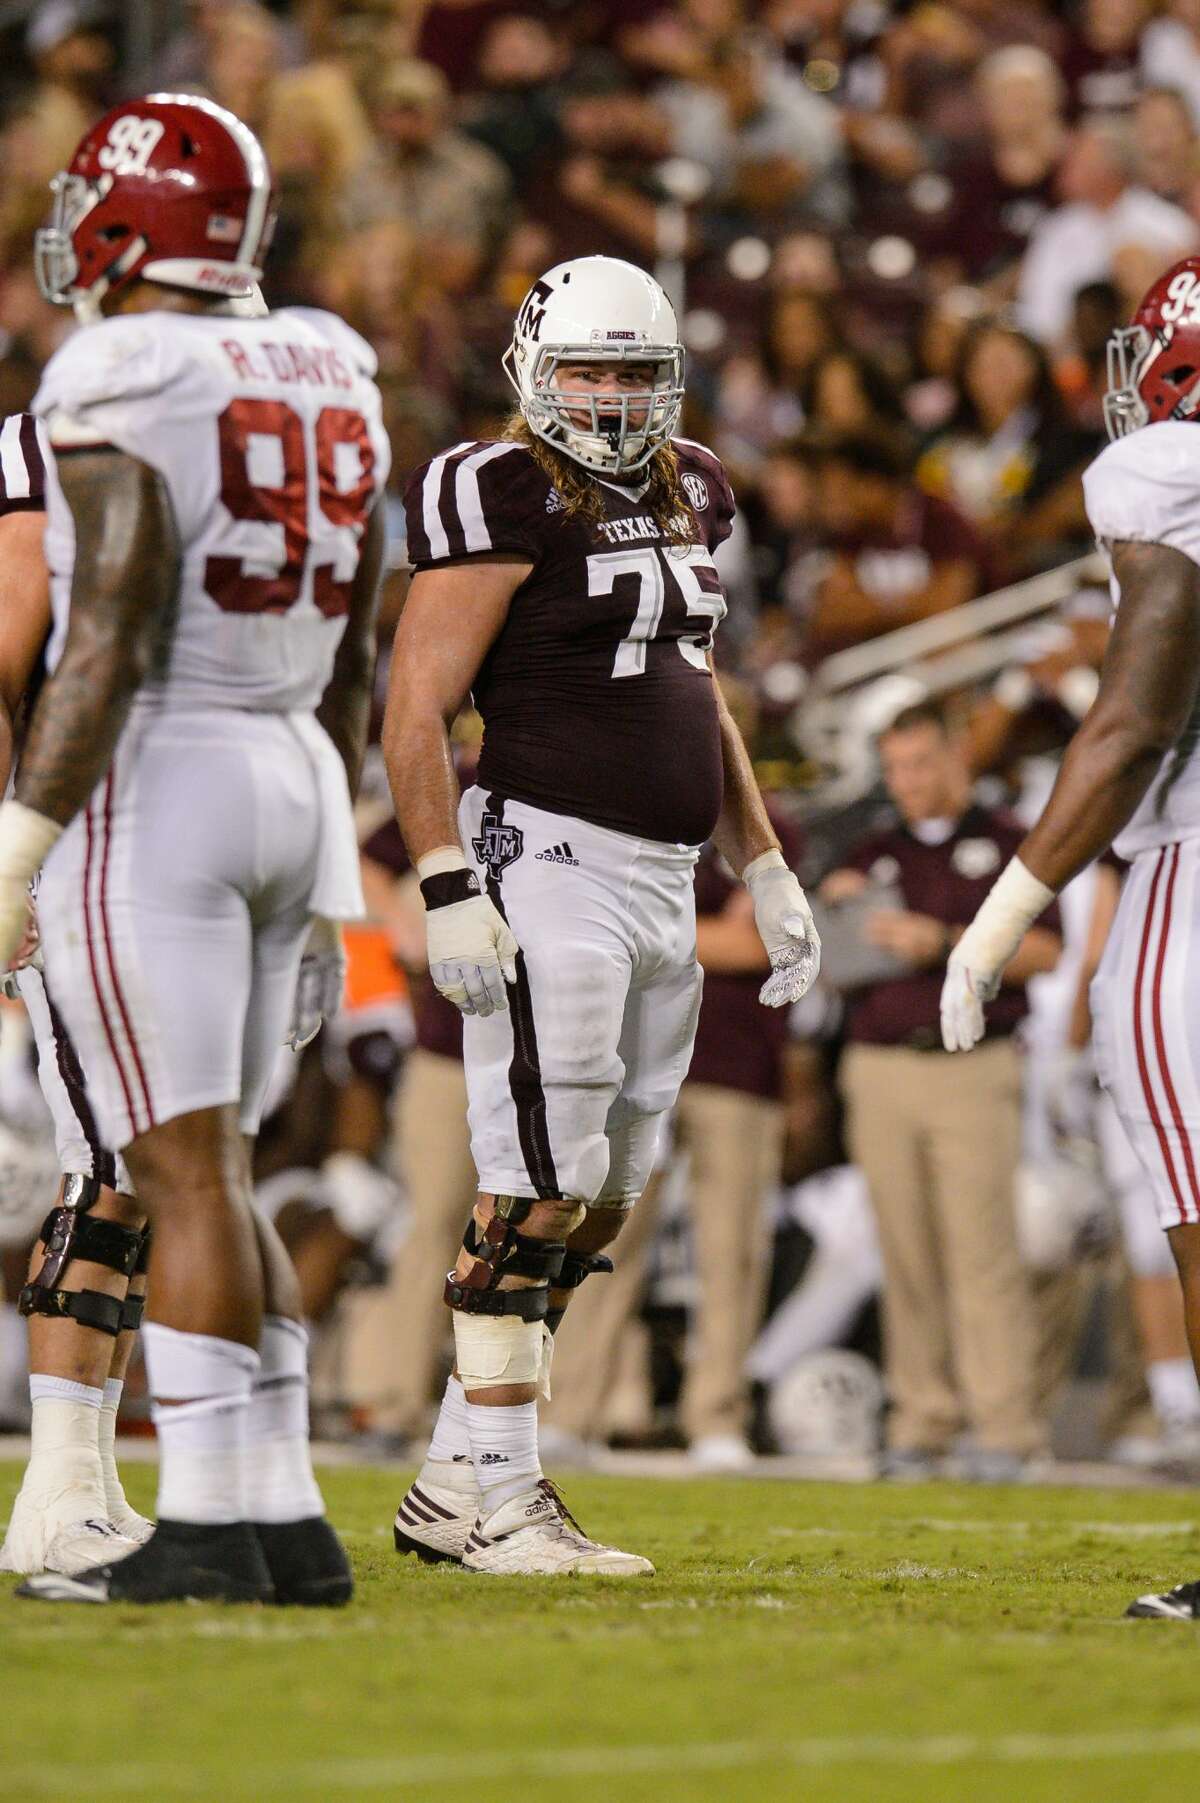 COLLEGE STATION, TX - OCTOBER 07: Texas A&M Aggies offensive lineman Koda Martin (75) gets ready for a play during the college football game between the Alabama Crimson Tide and the Texas A&M Aggies on October 7th, 2017 at Kyle Field in College Station, TX. (Photo by Daniel Dunn/Icon Sportswire via Getty Images)